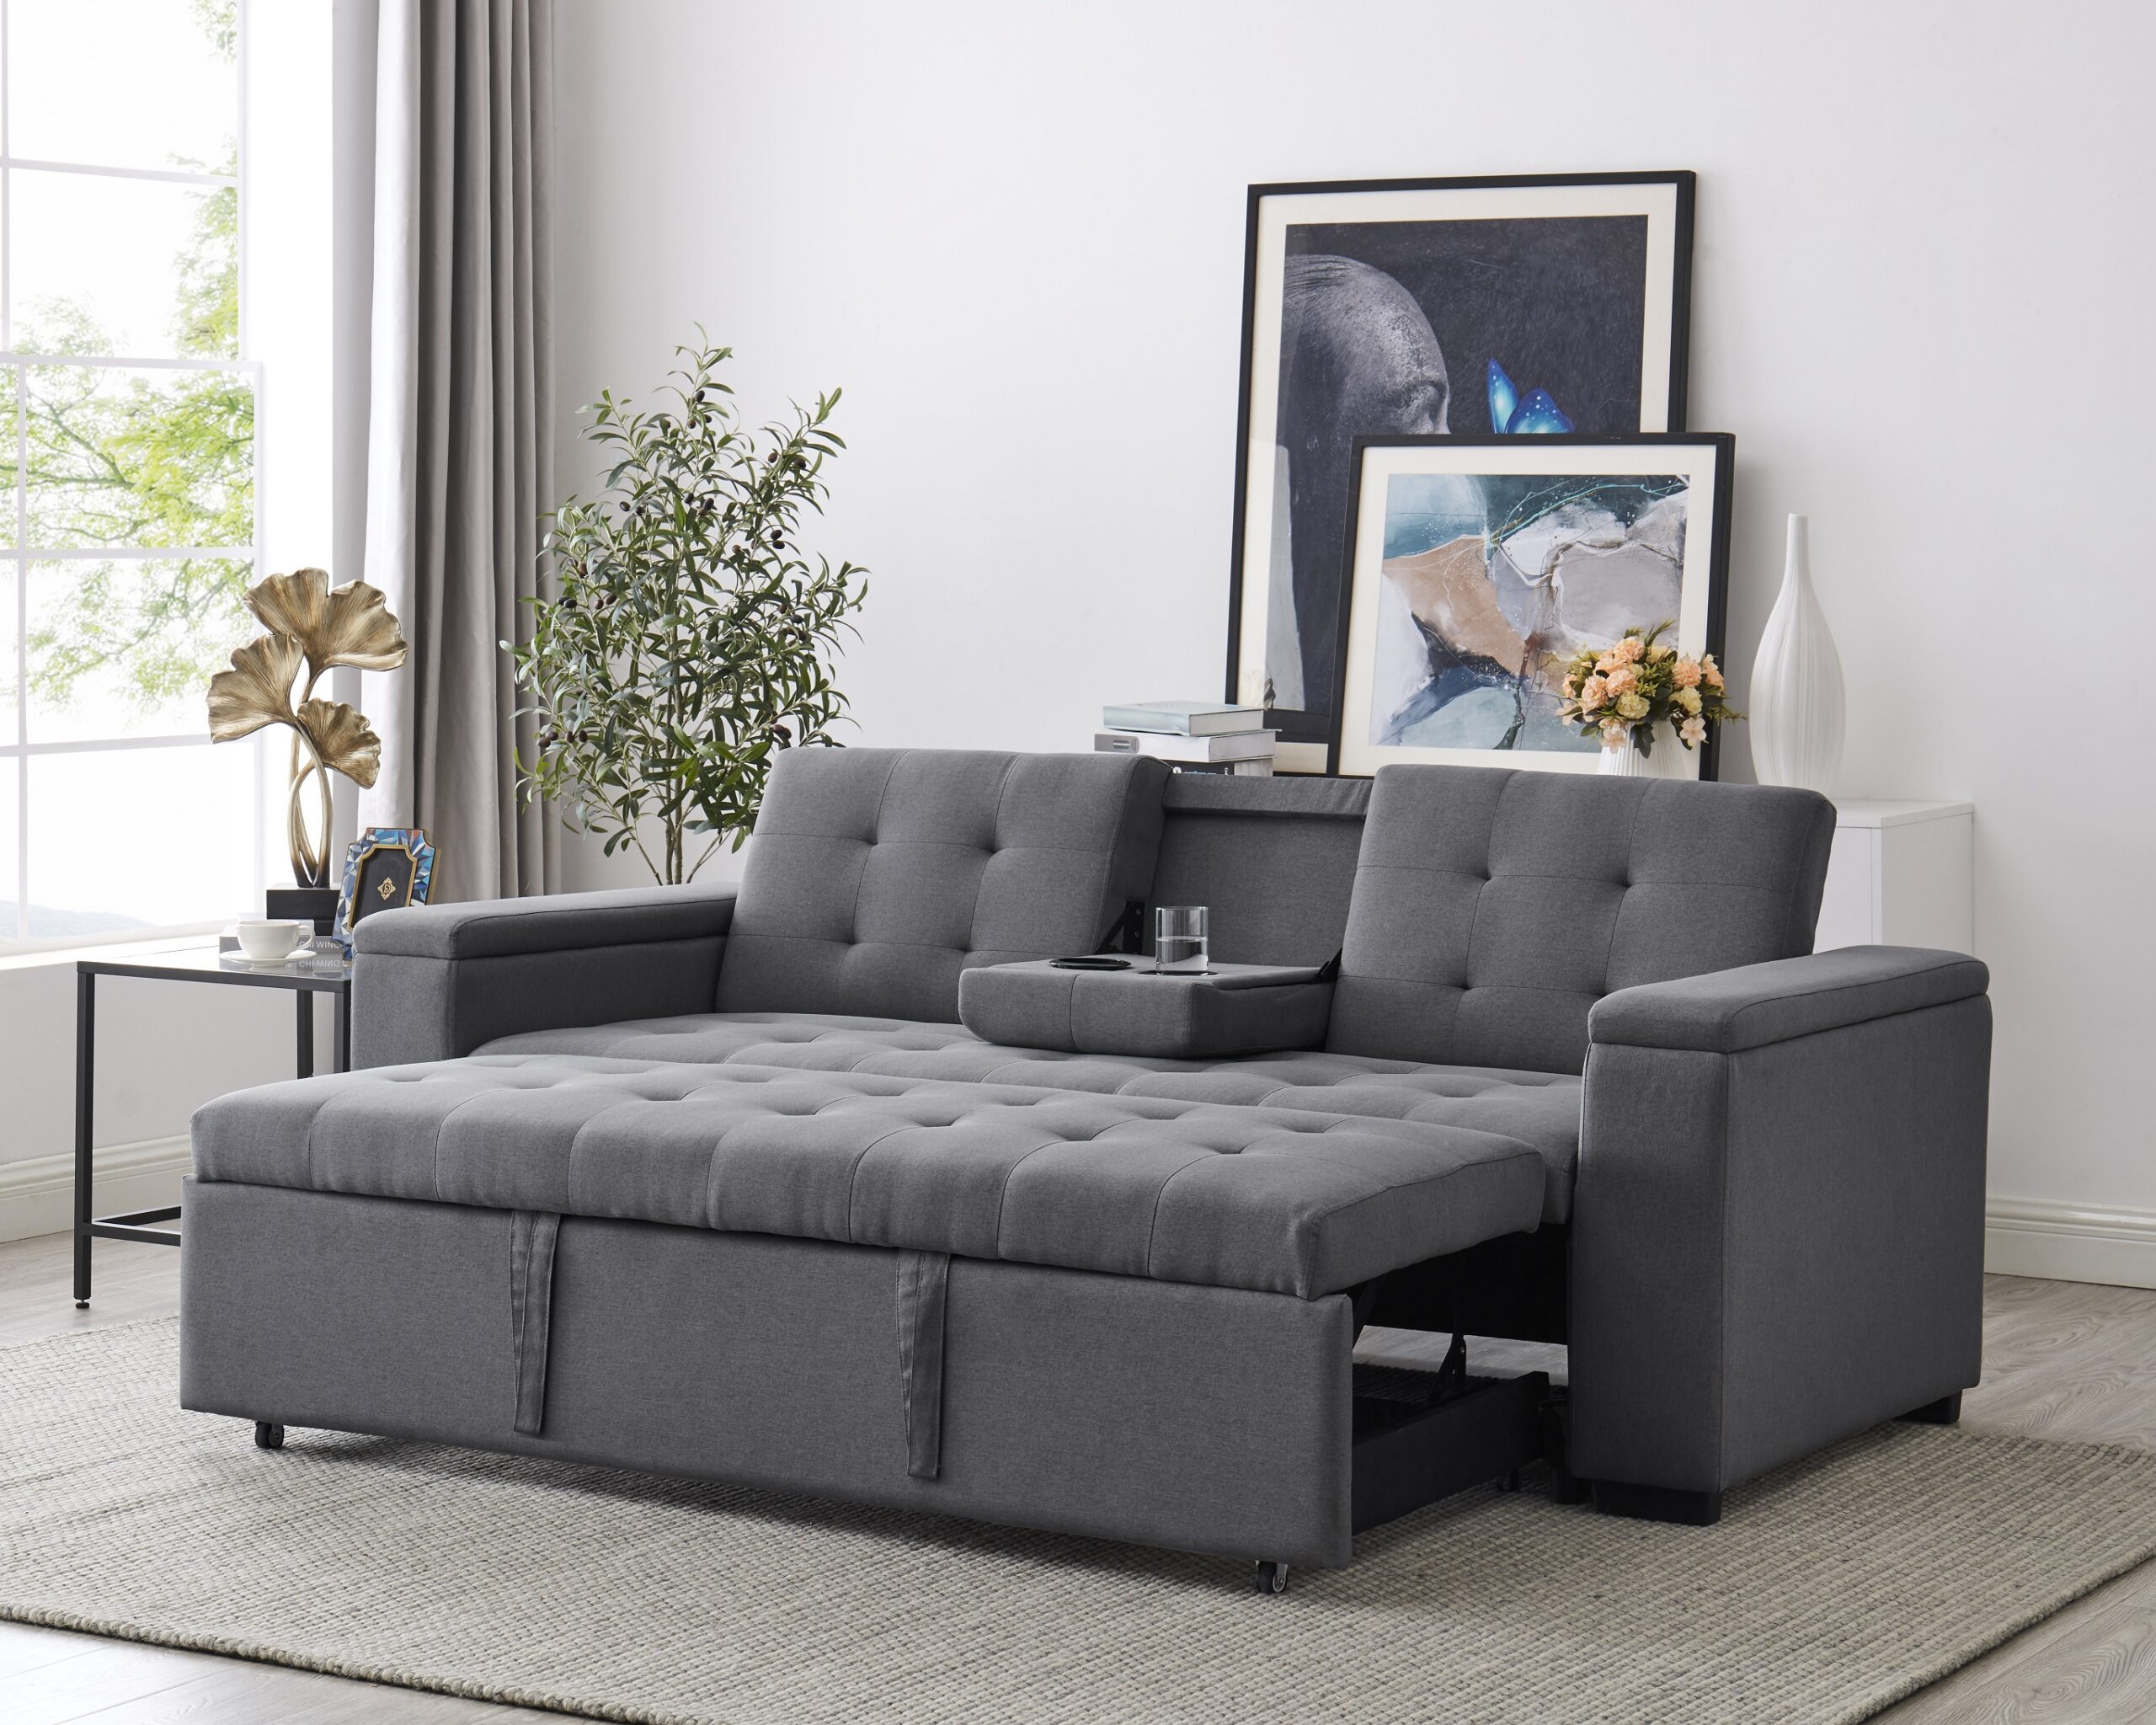 Olympia Sofa Bed Clearance Was 799 Furniture Mart